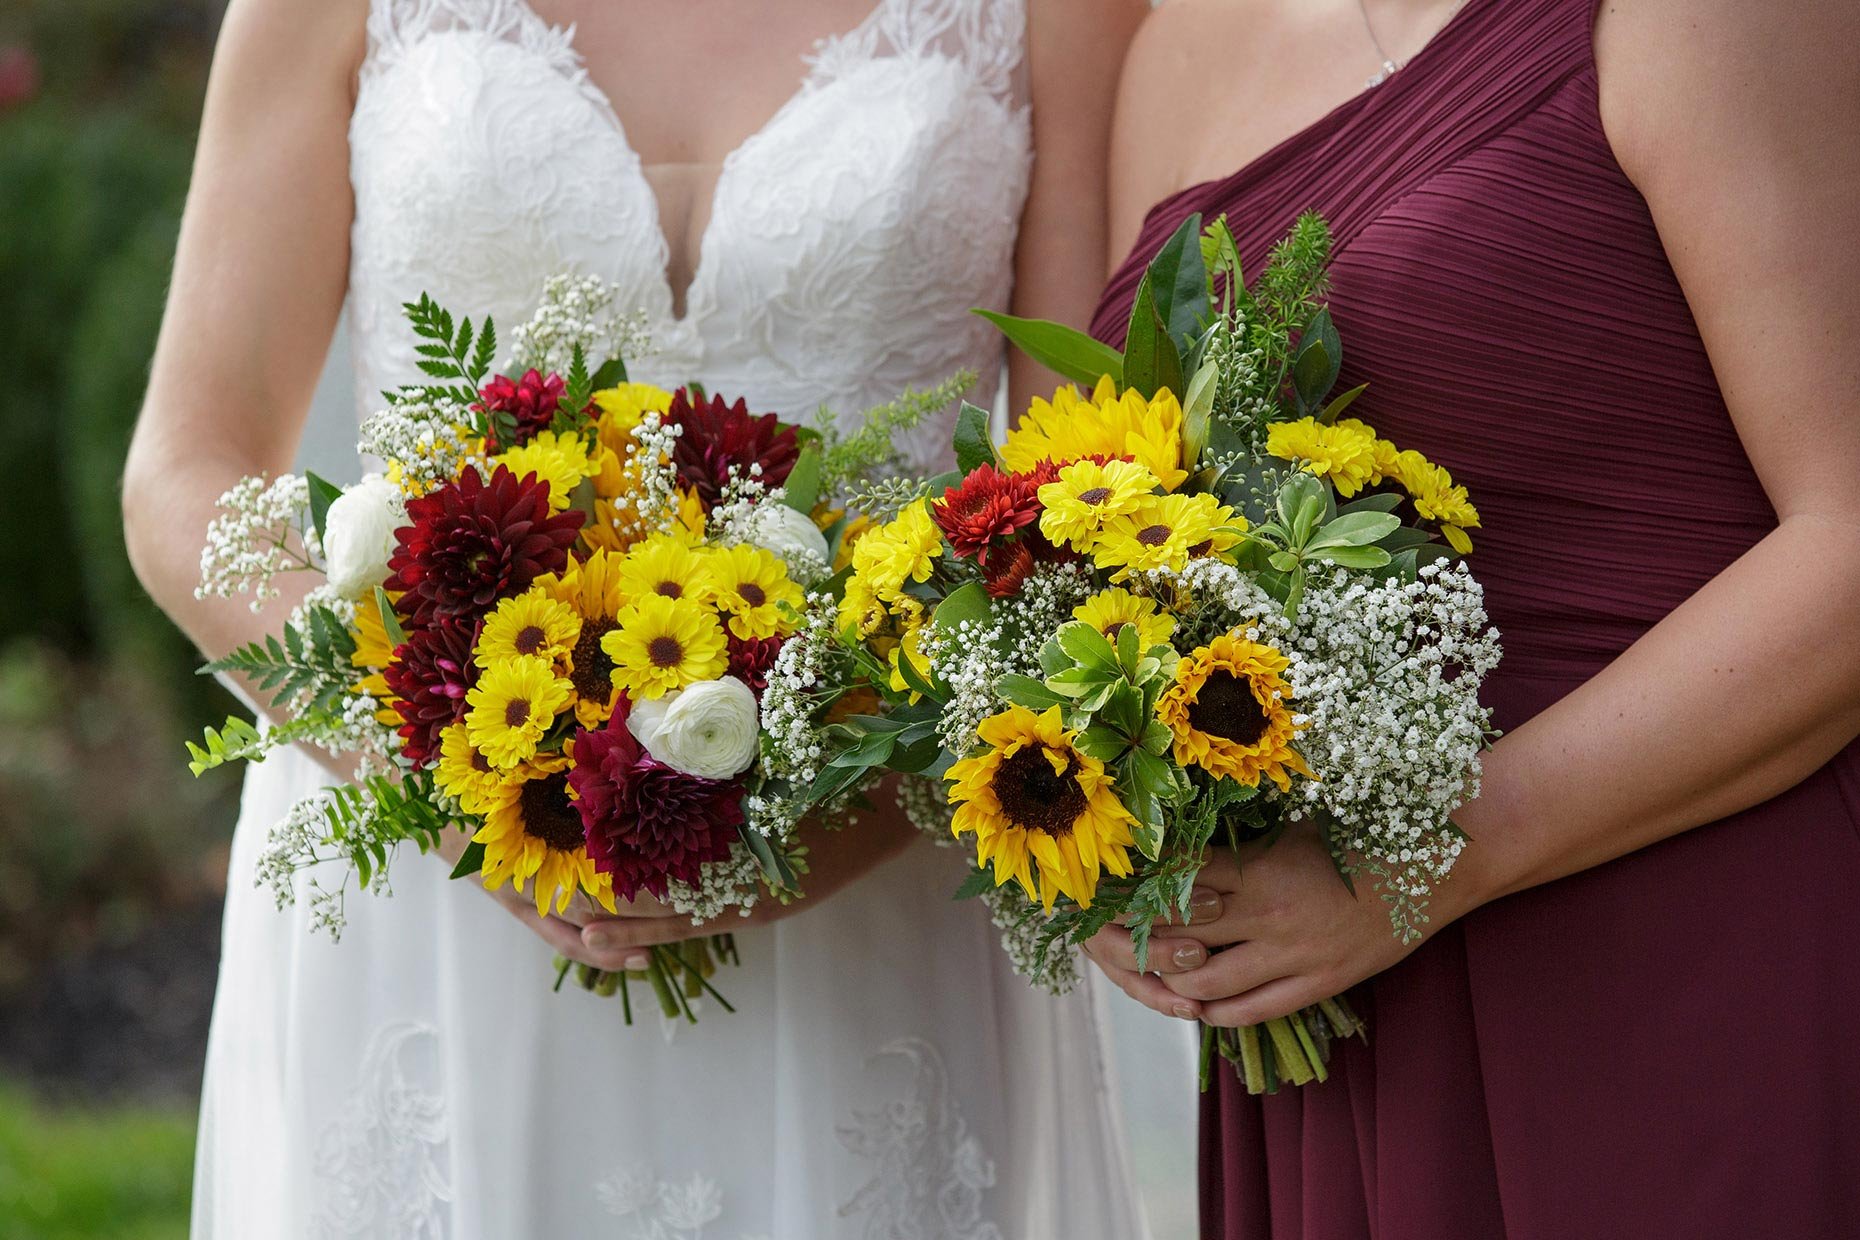 Bride &amp; Bridesmaid's bouquets with Red &amp; Yellow Flowers